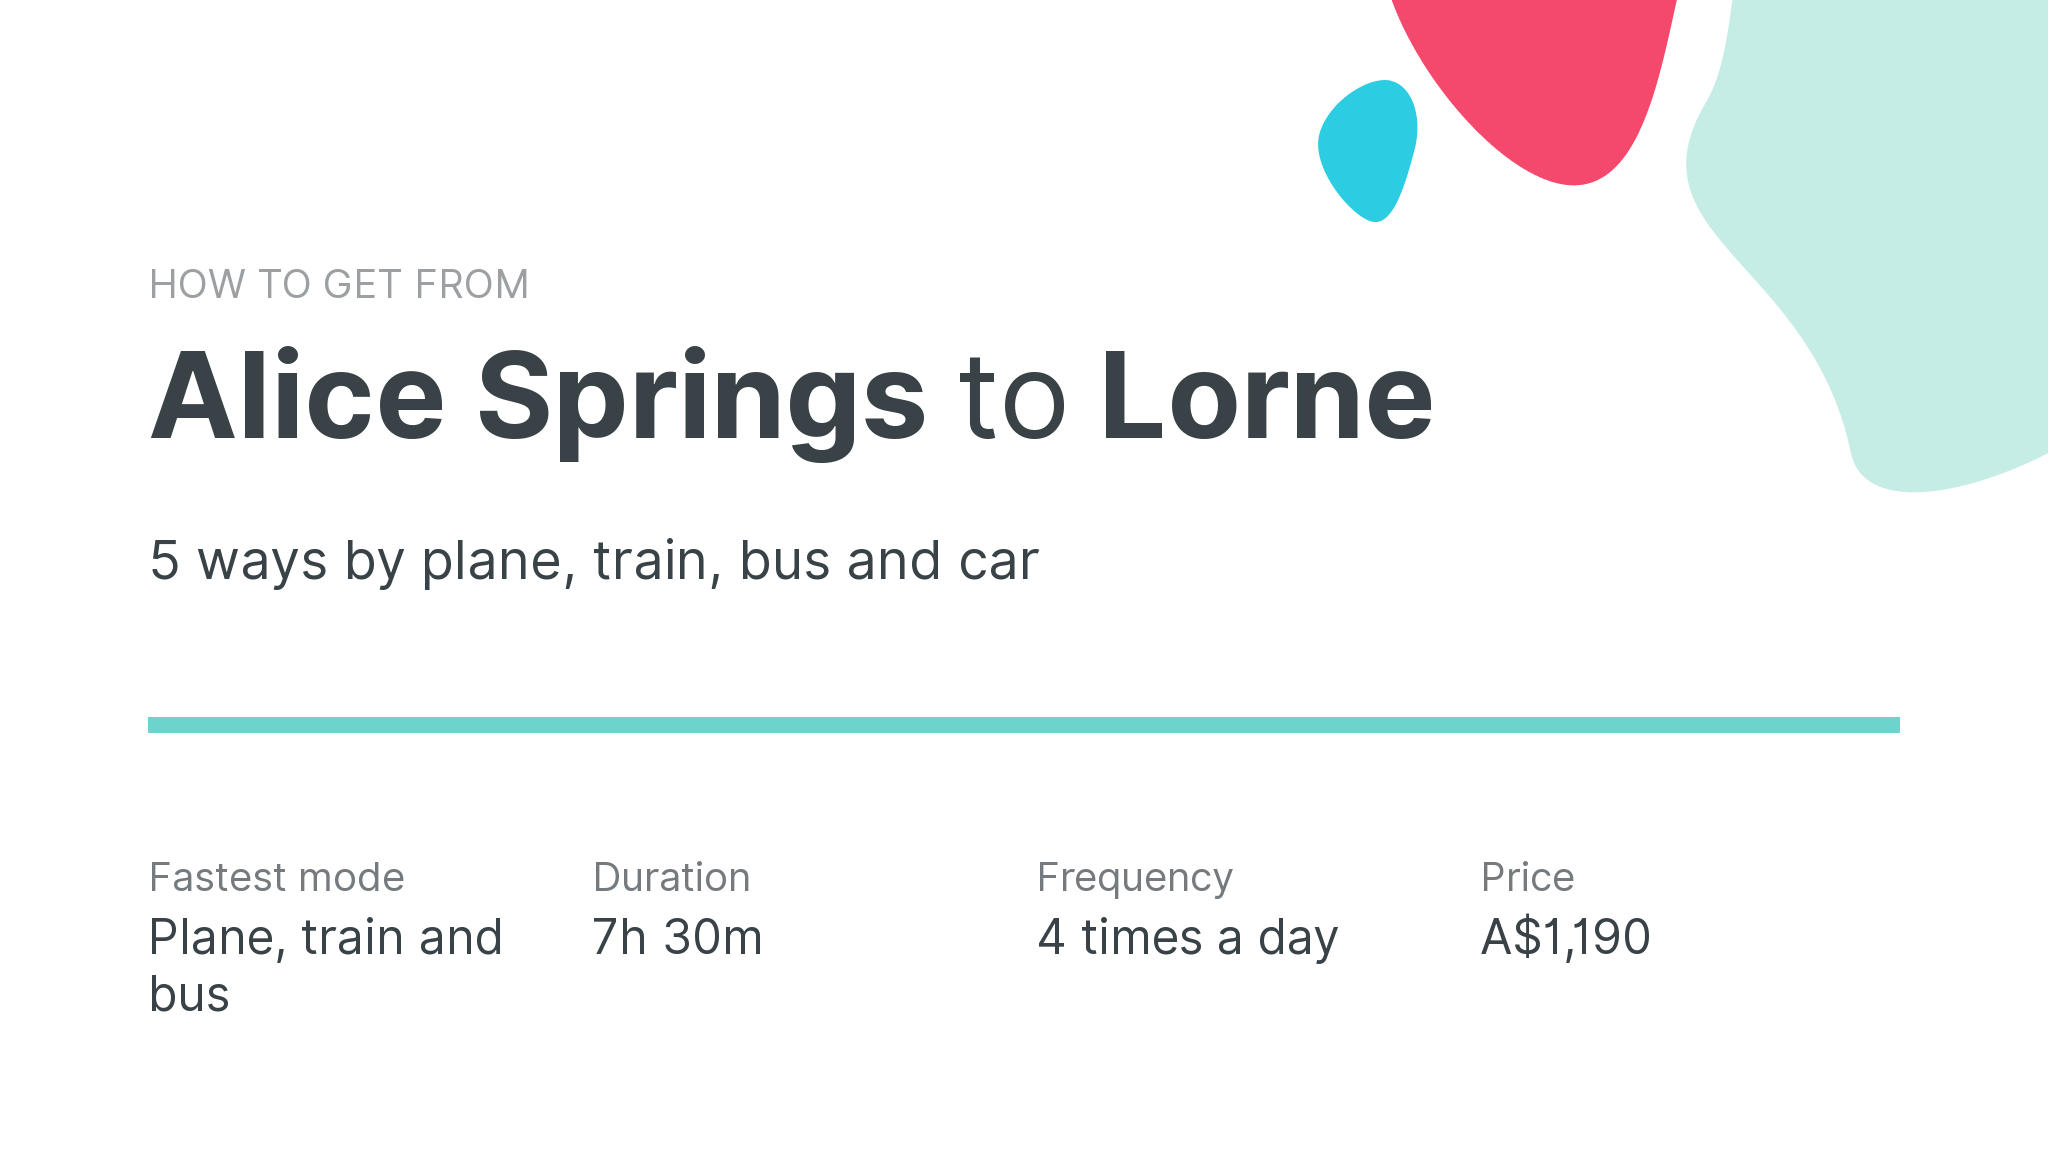 How do I get from Alice Springs to Lorne